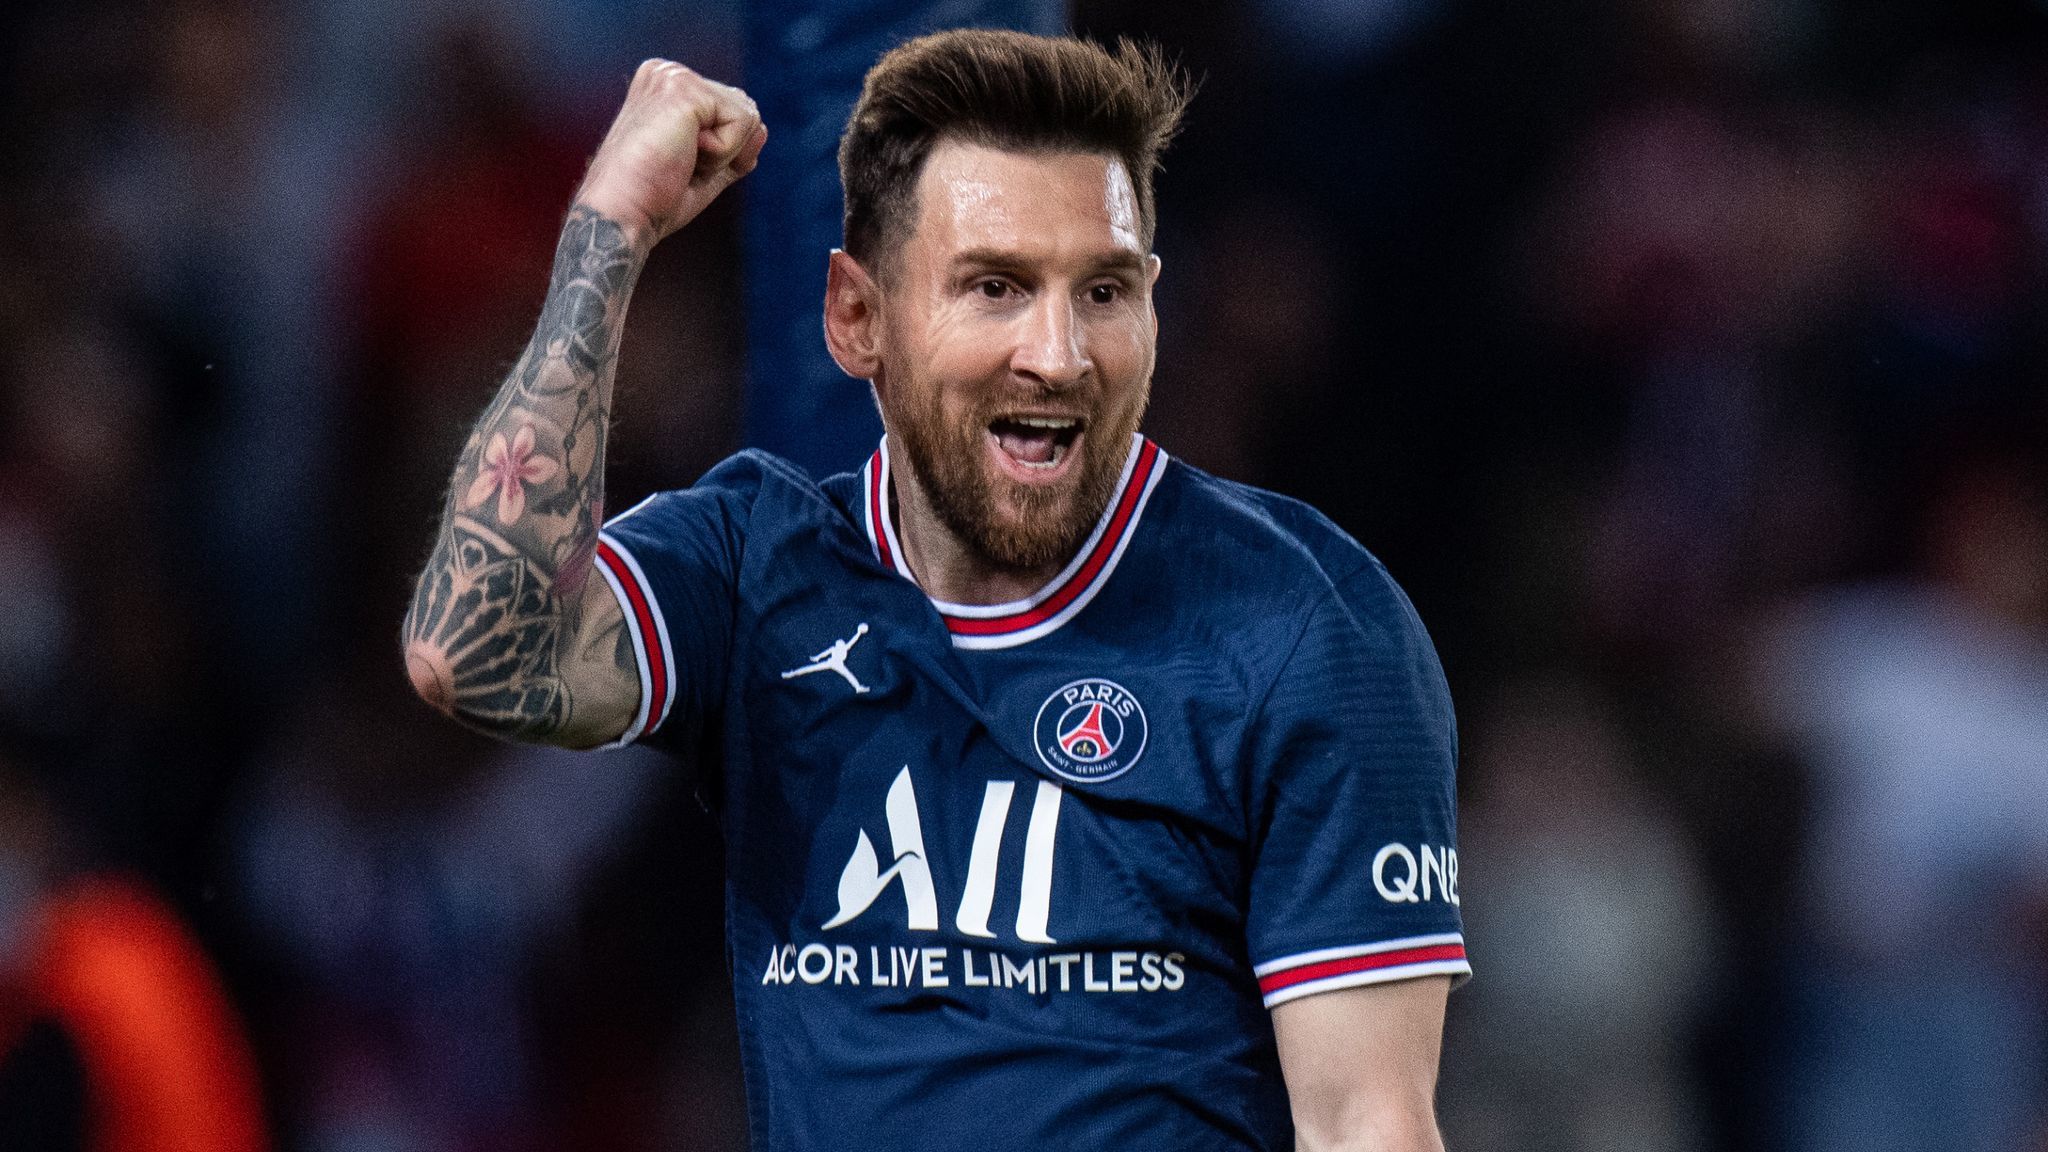 PSG president Al-Khelaifi claims Messi wants to stay with the team